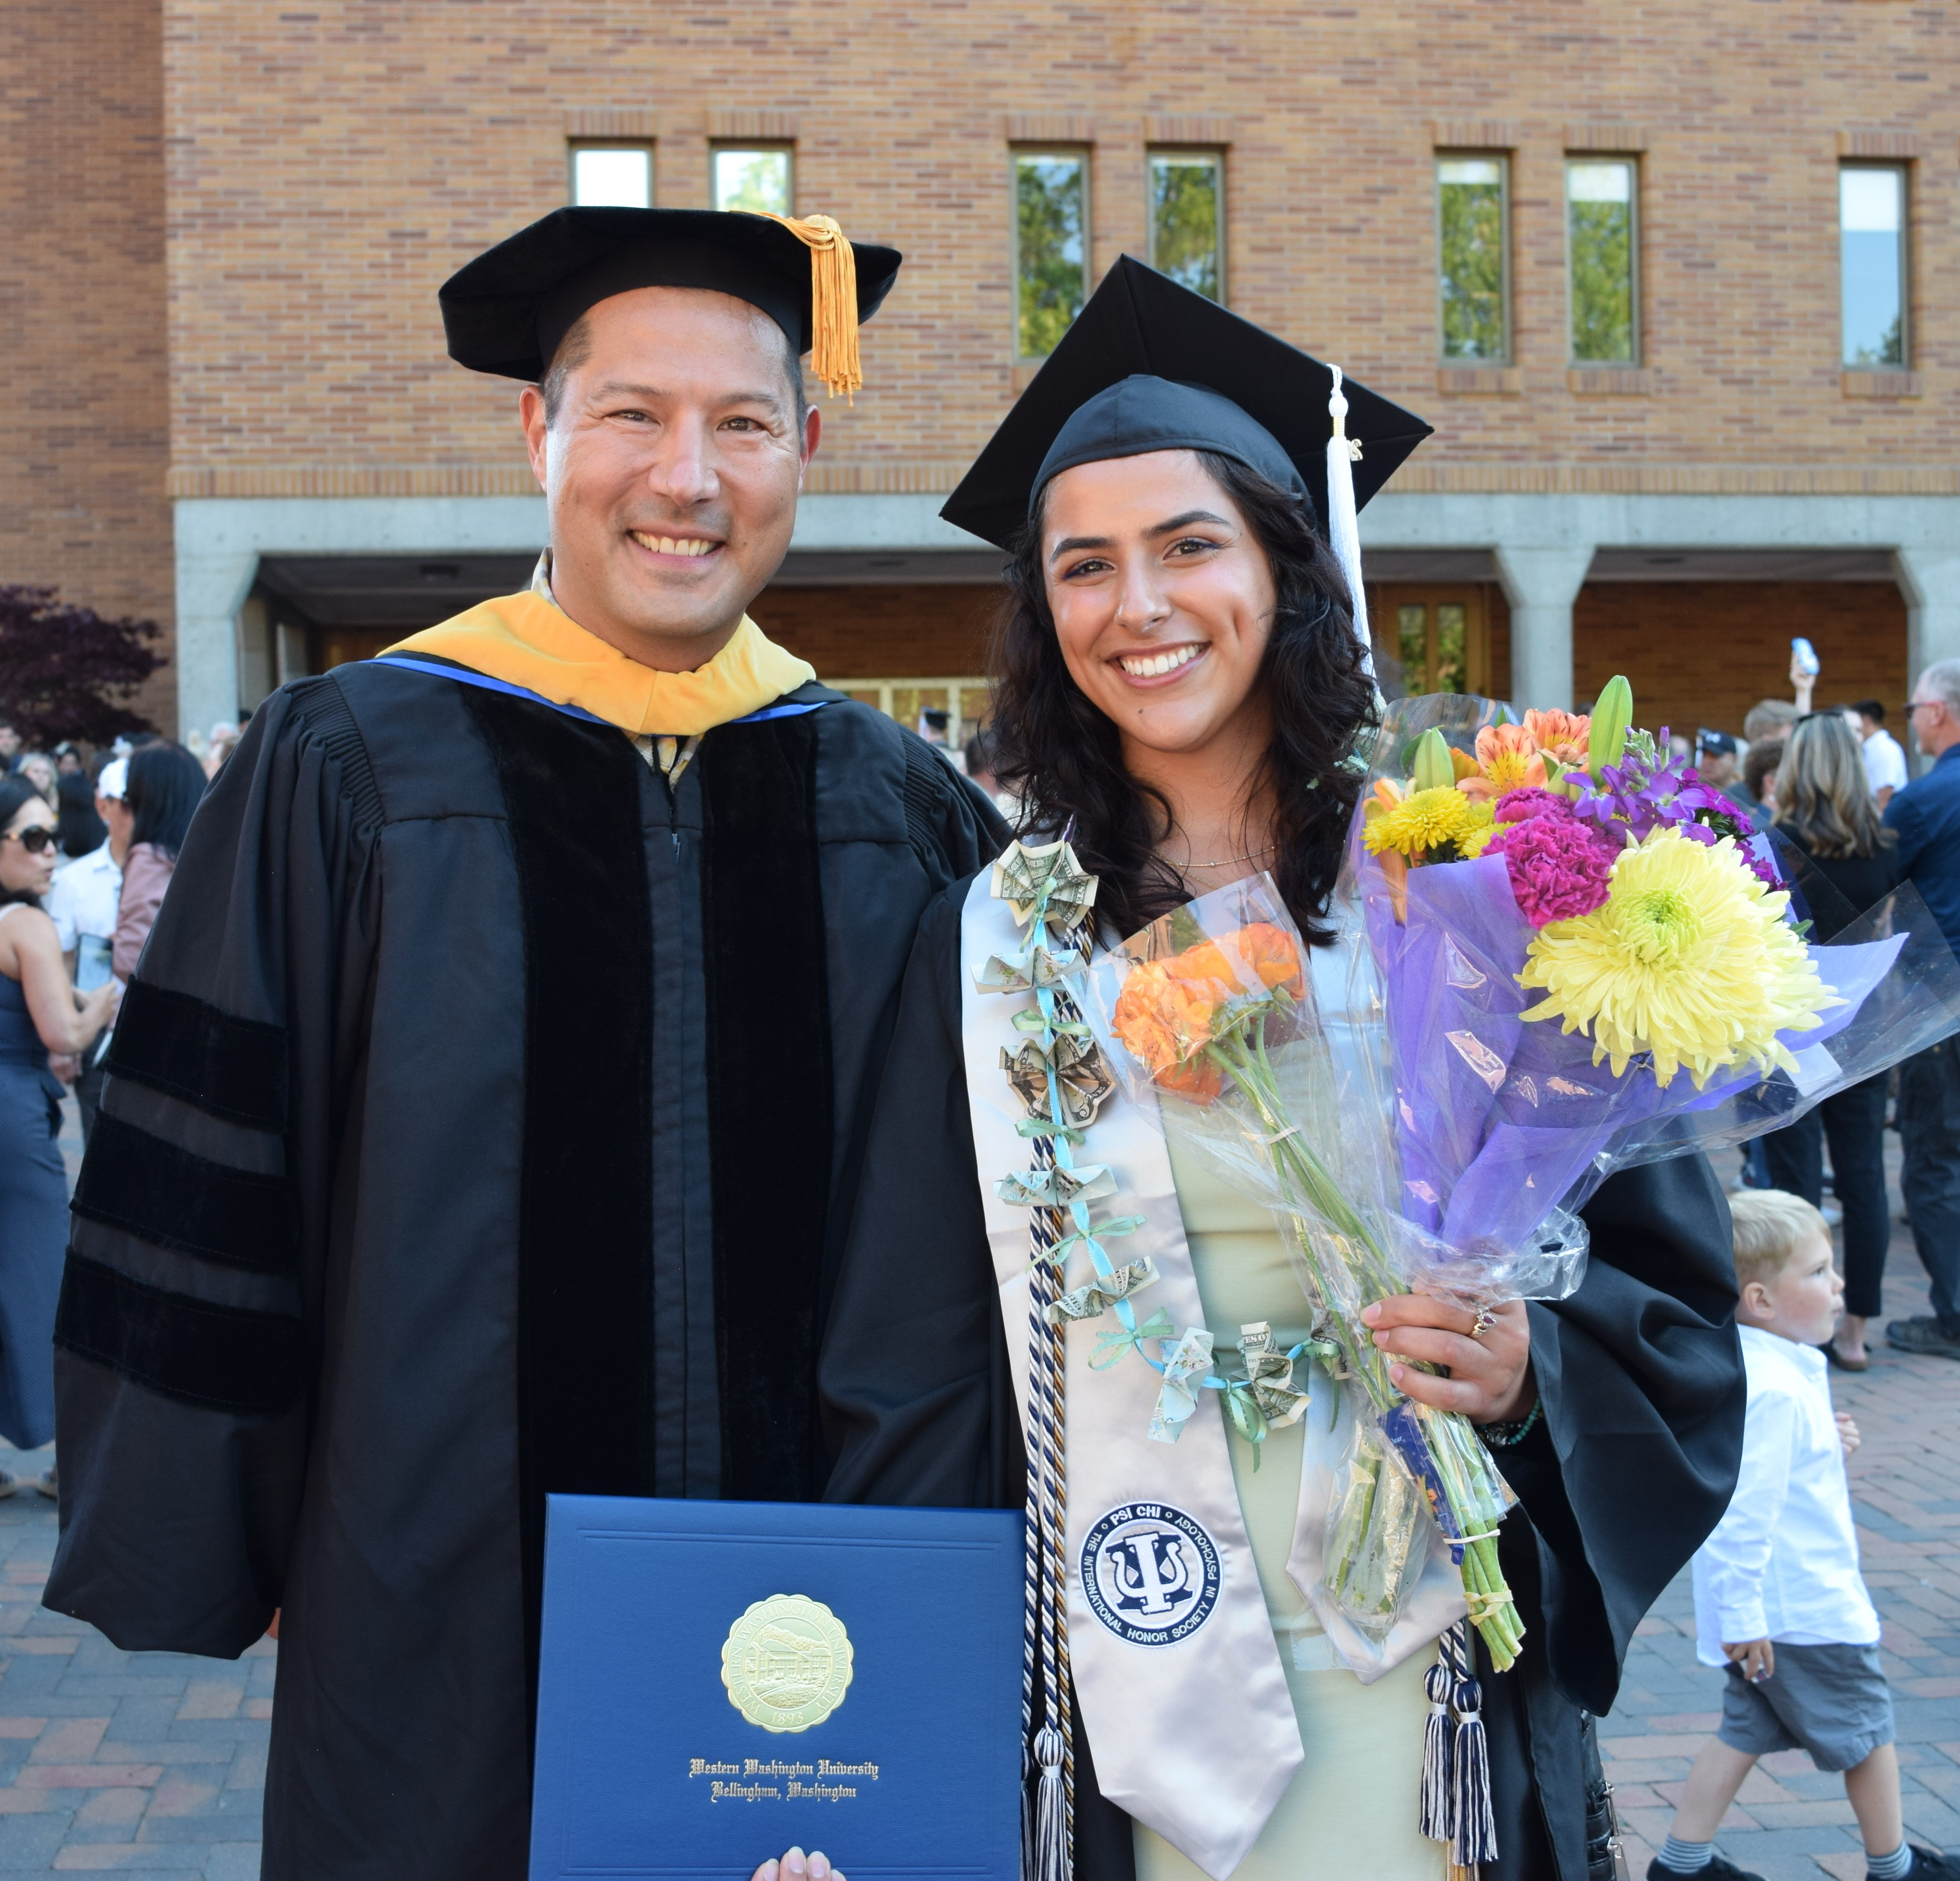 Jasmine and Dr. Czopp smiling wearing graduation regalia and holding flowers